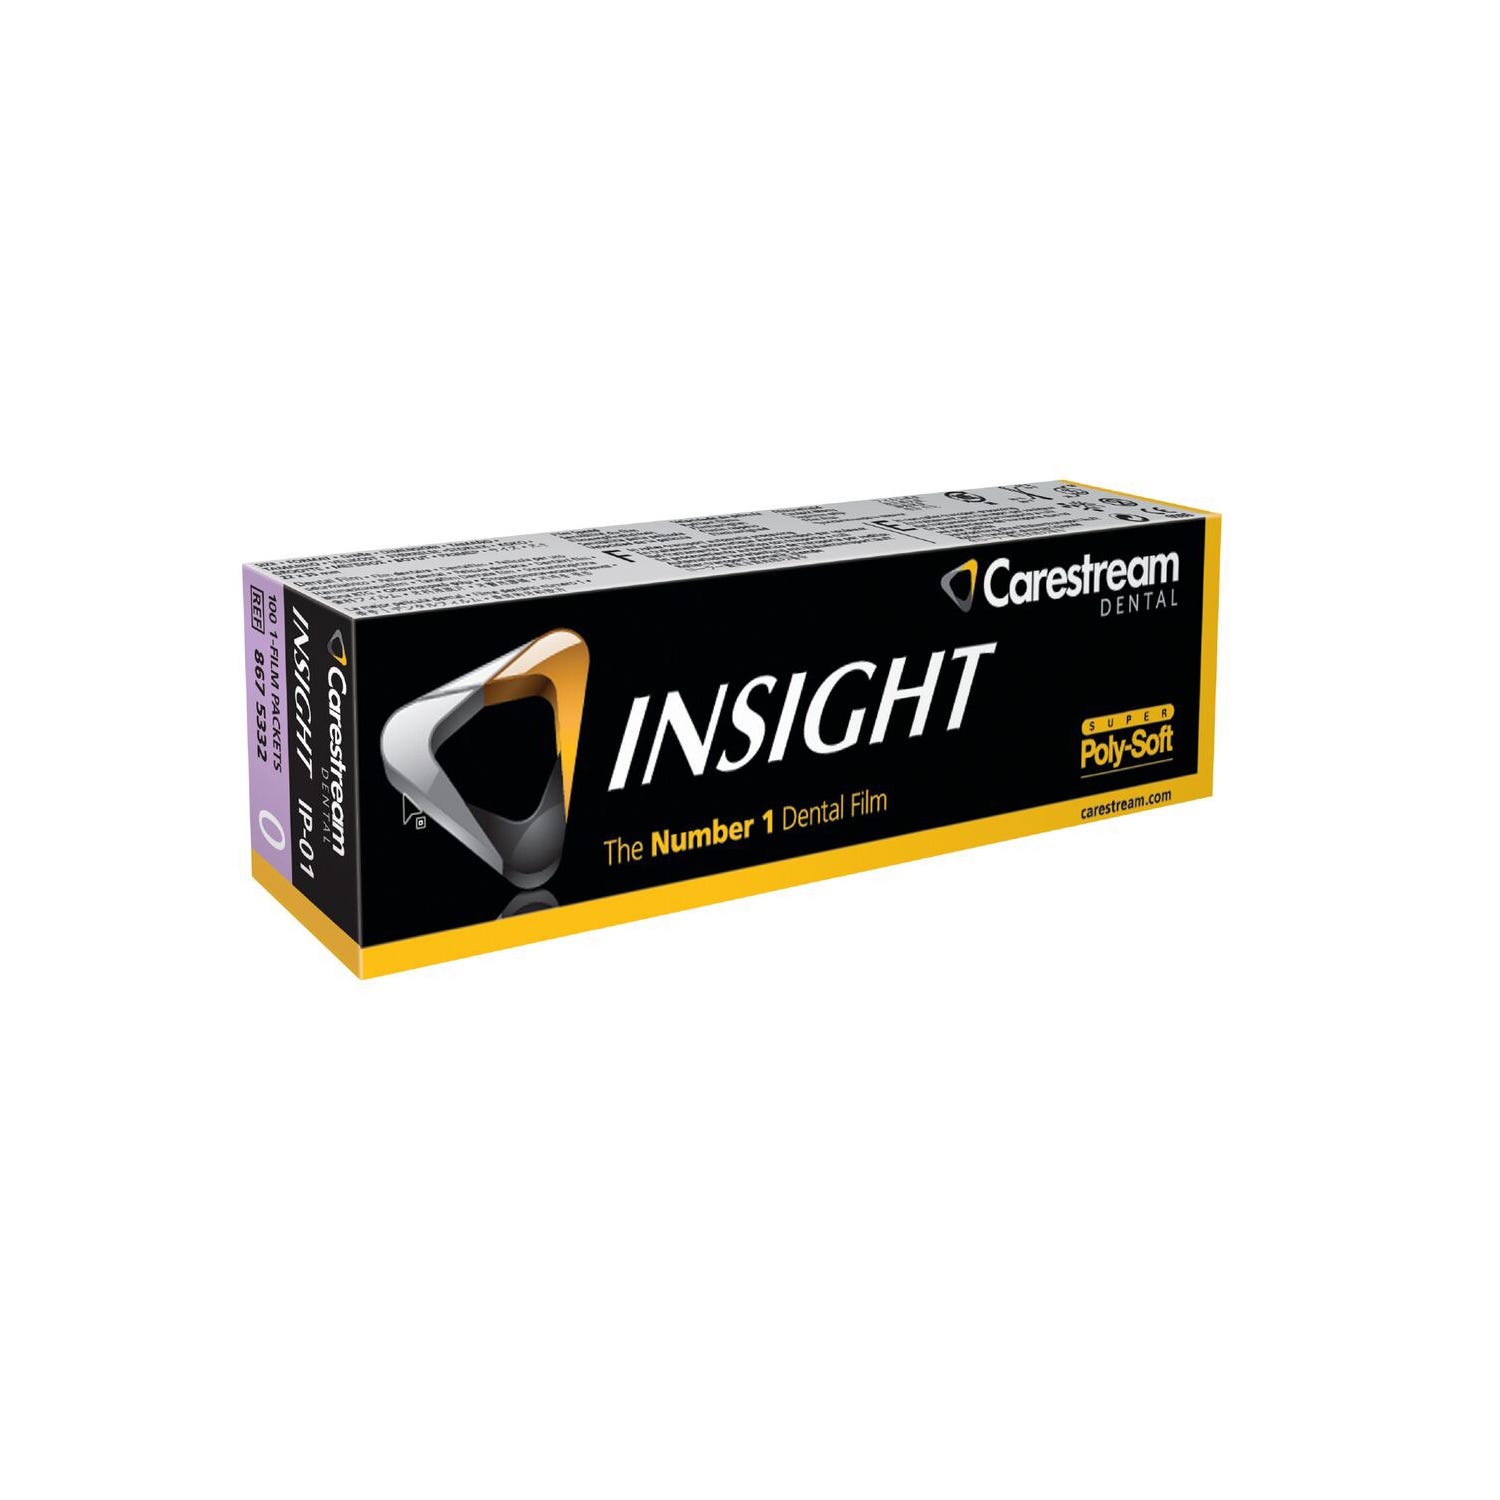 INSIGHT Dental Film, Size 0, IP-01, Super Poly-Soft Packets - 100/Box